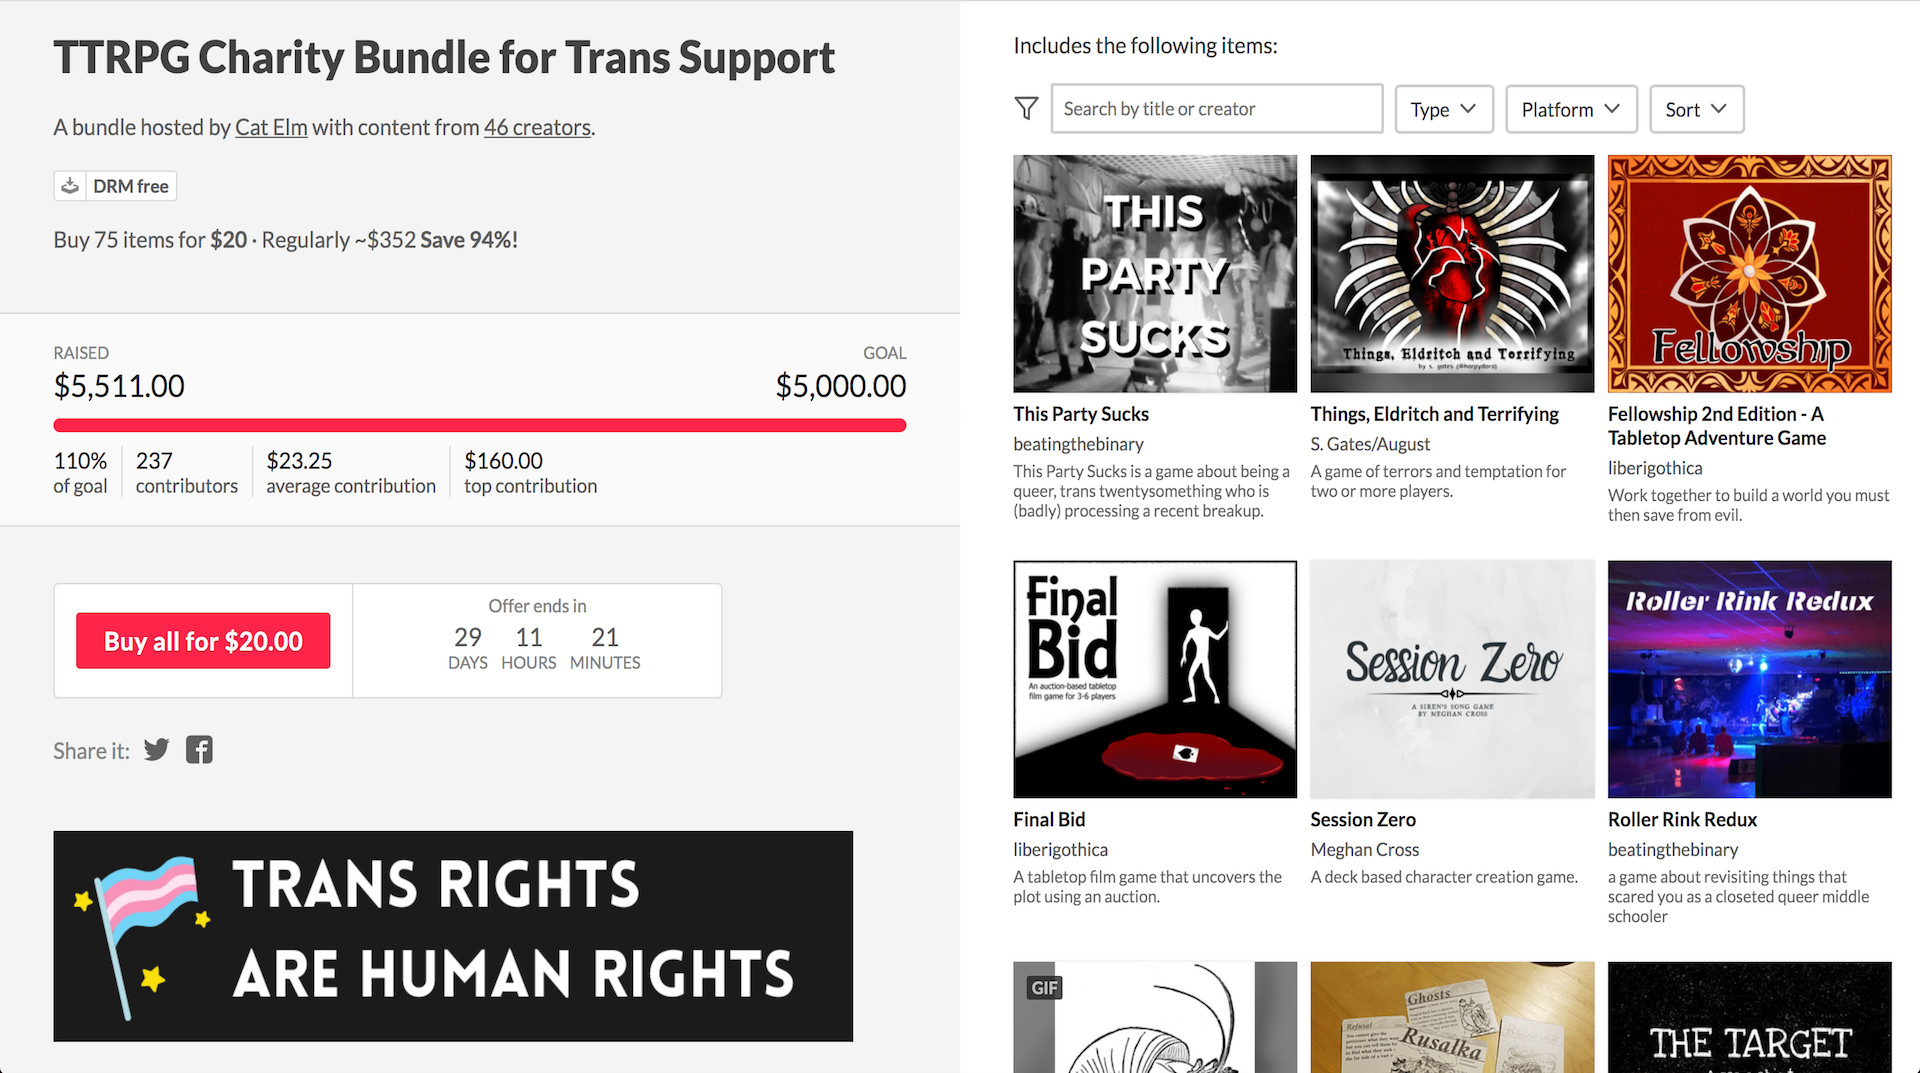 Image for Tabletop RPG Charity Bundle for Trans Support packages 75 games for $20